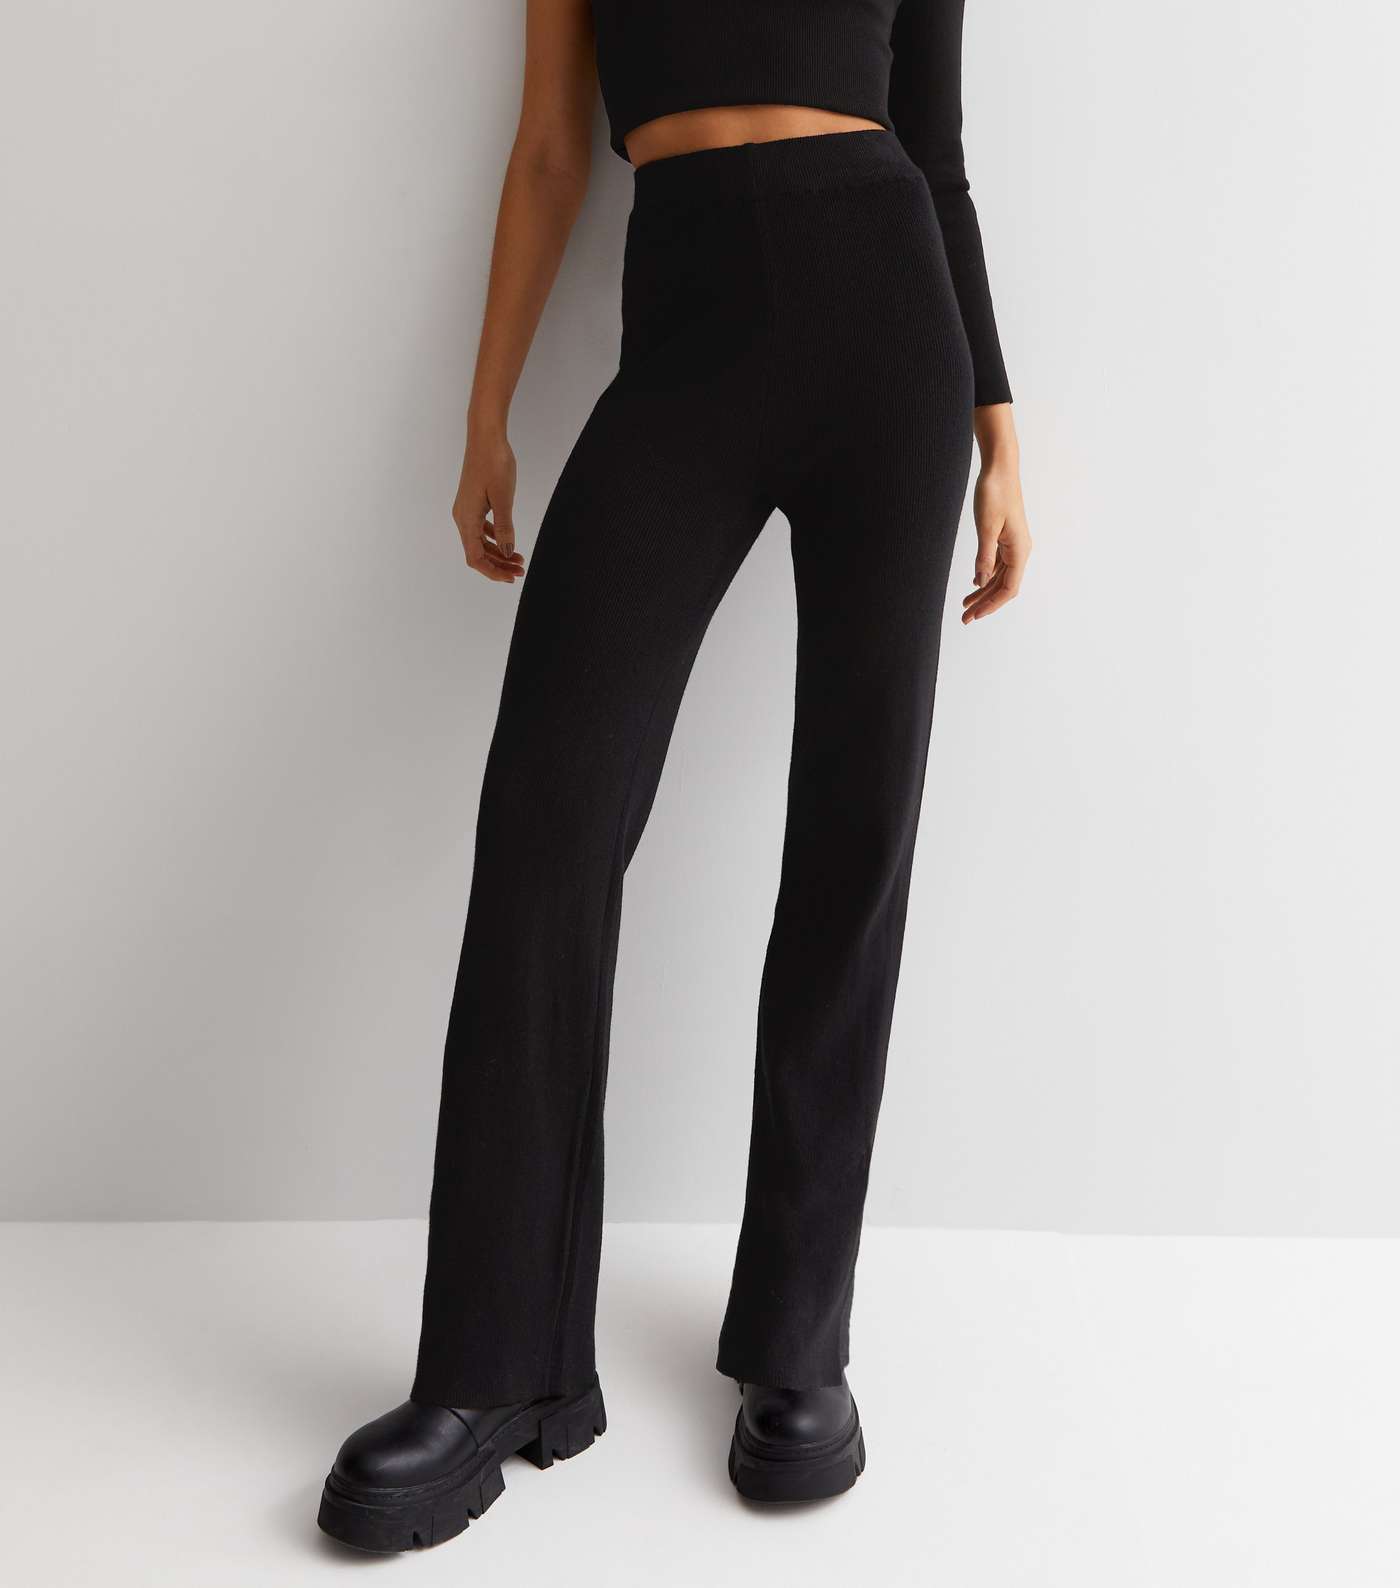 Gini London Black Ribbed Knit High Waist Trousers Image 3